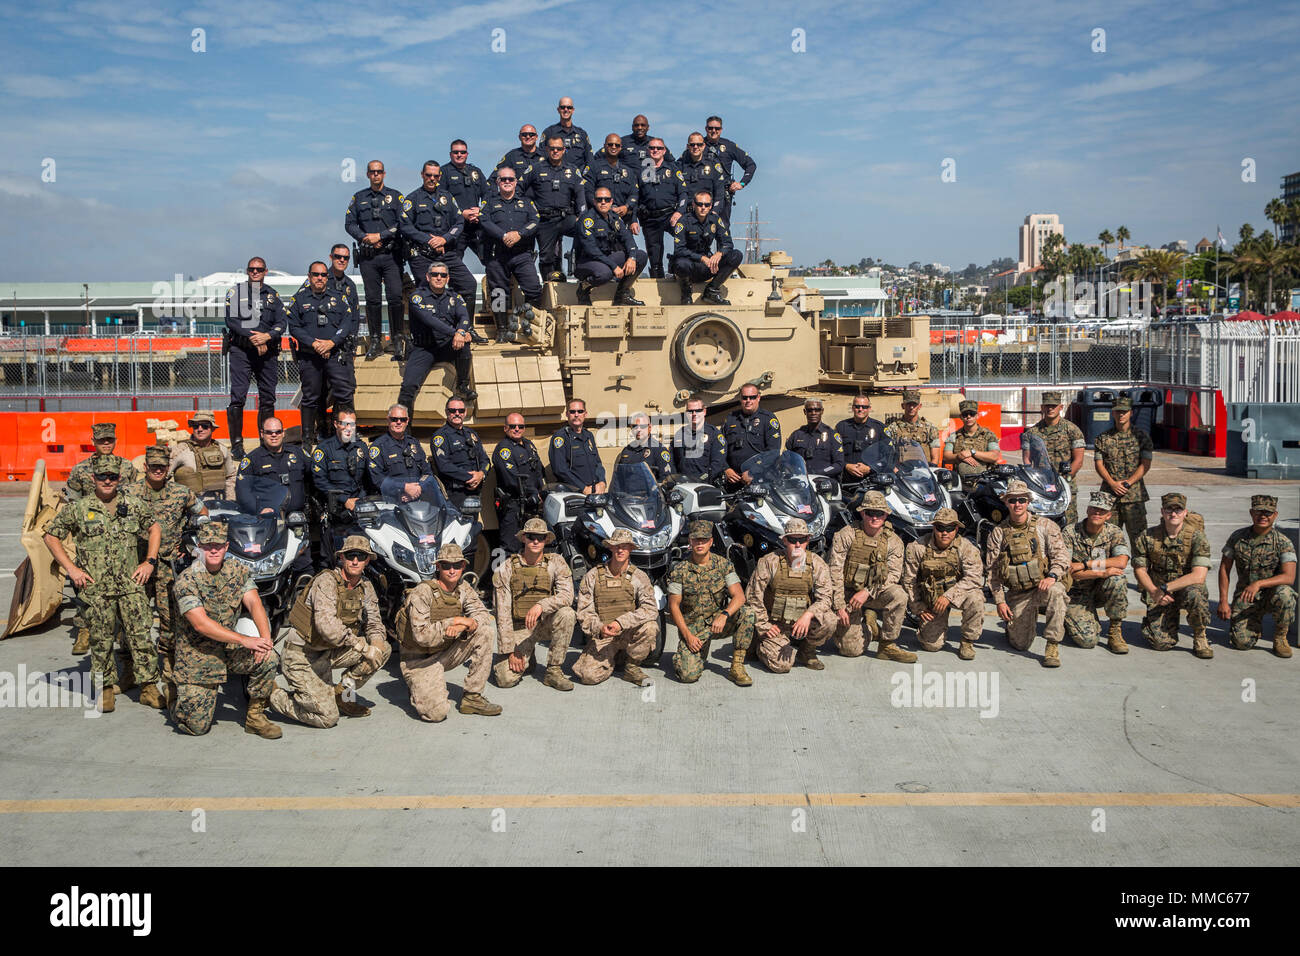 Marines along with the San Diego Police Department pose for a group picture at the Broadway Pier in San Diego, Calif., Oct. 11, 2017 as part of San Diego Fleet Week. Fleet week provides an opportunity for the American public to meet their Marine Corps, Navy and Coast Guard team and experience America's sea services. (U.S. Marine Corps photo by Lance Cpl. Gabino Perez) Stock Photo